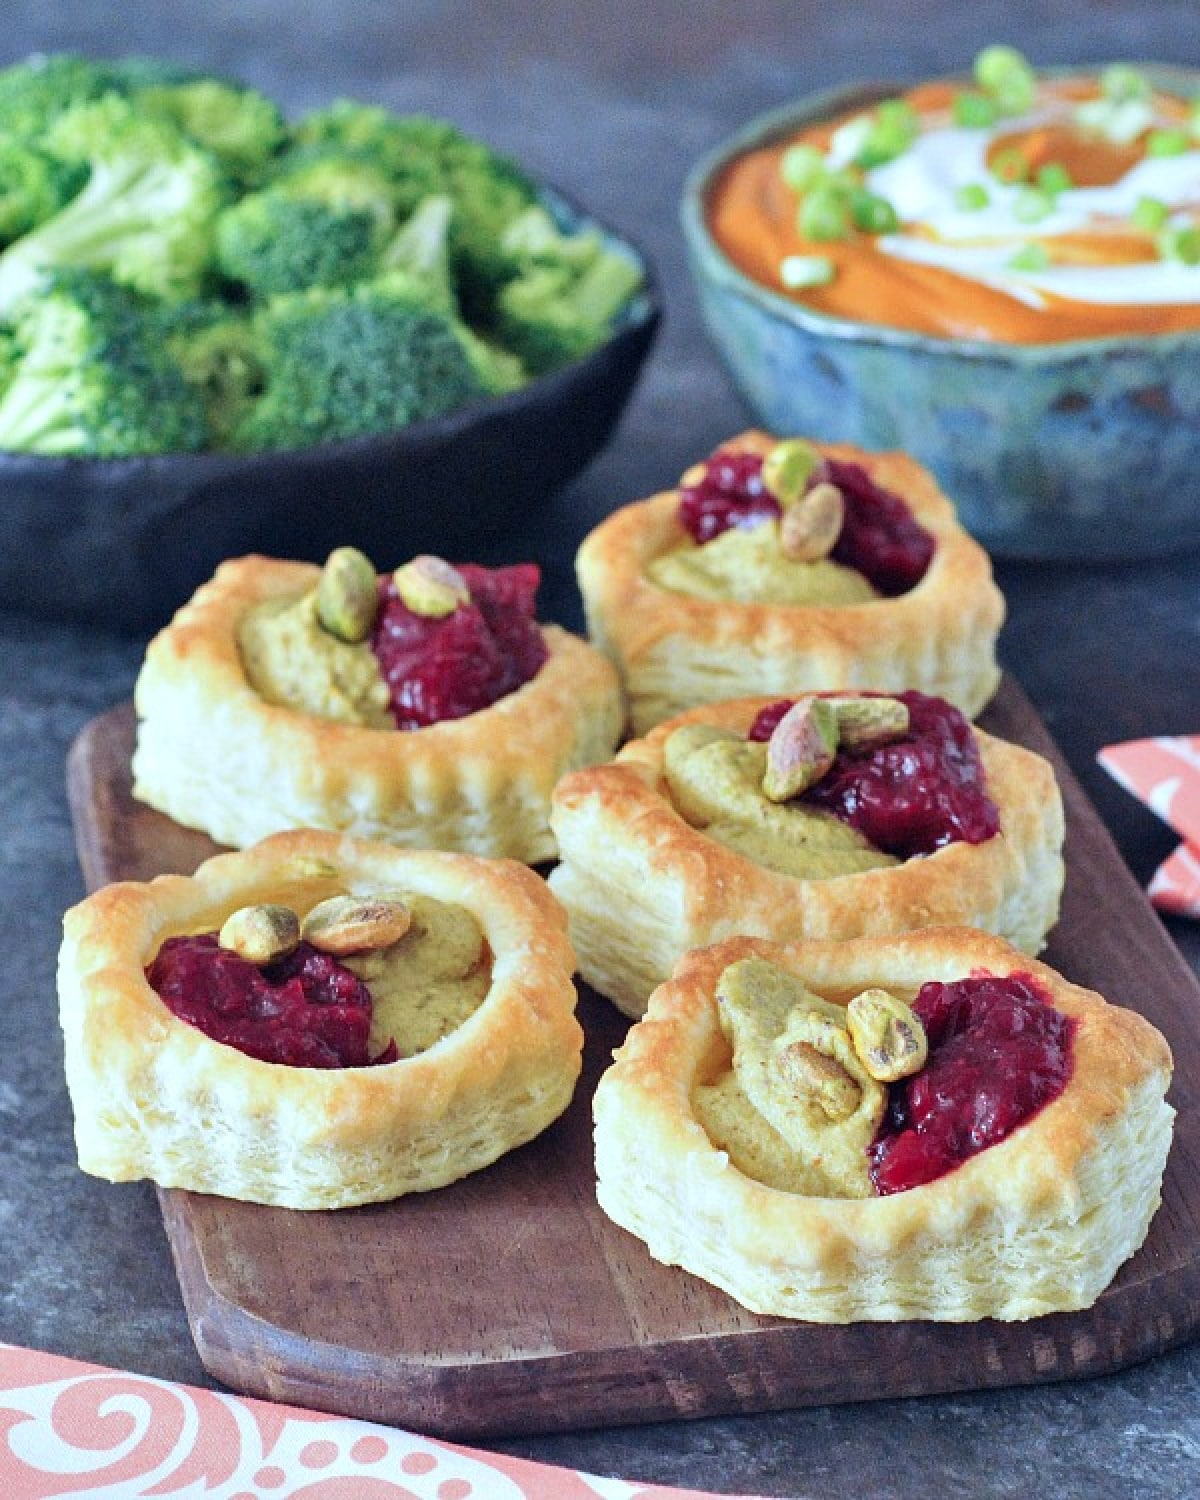 Bright pink and green garlic pistachio cranberry tarts on a wood serving board. A bowl of orange colored enchilada dip and a bowl of broccoli trees for dipping sit in the background.